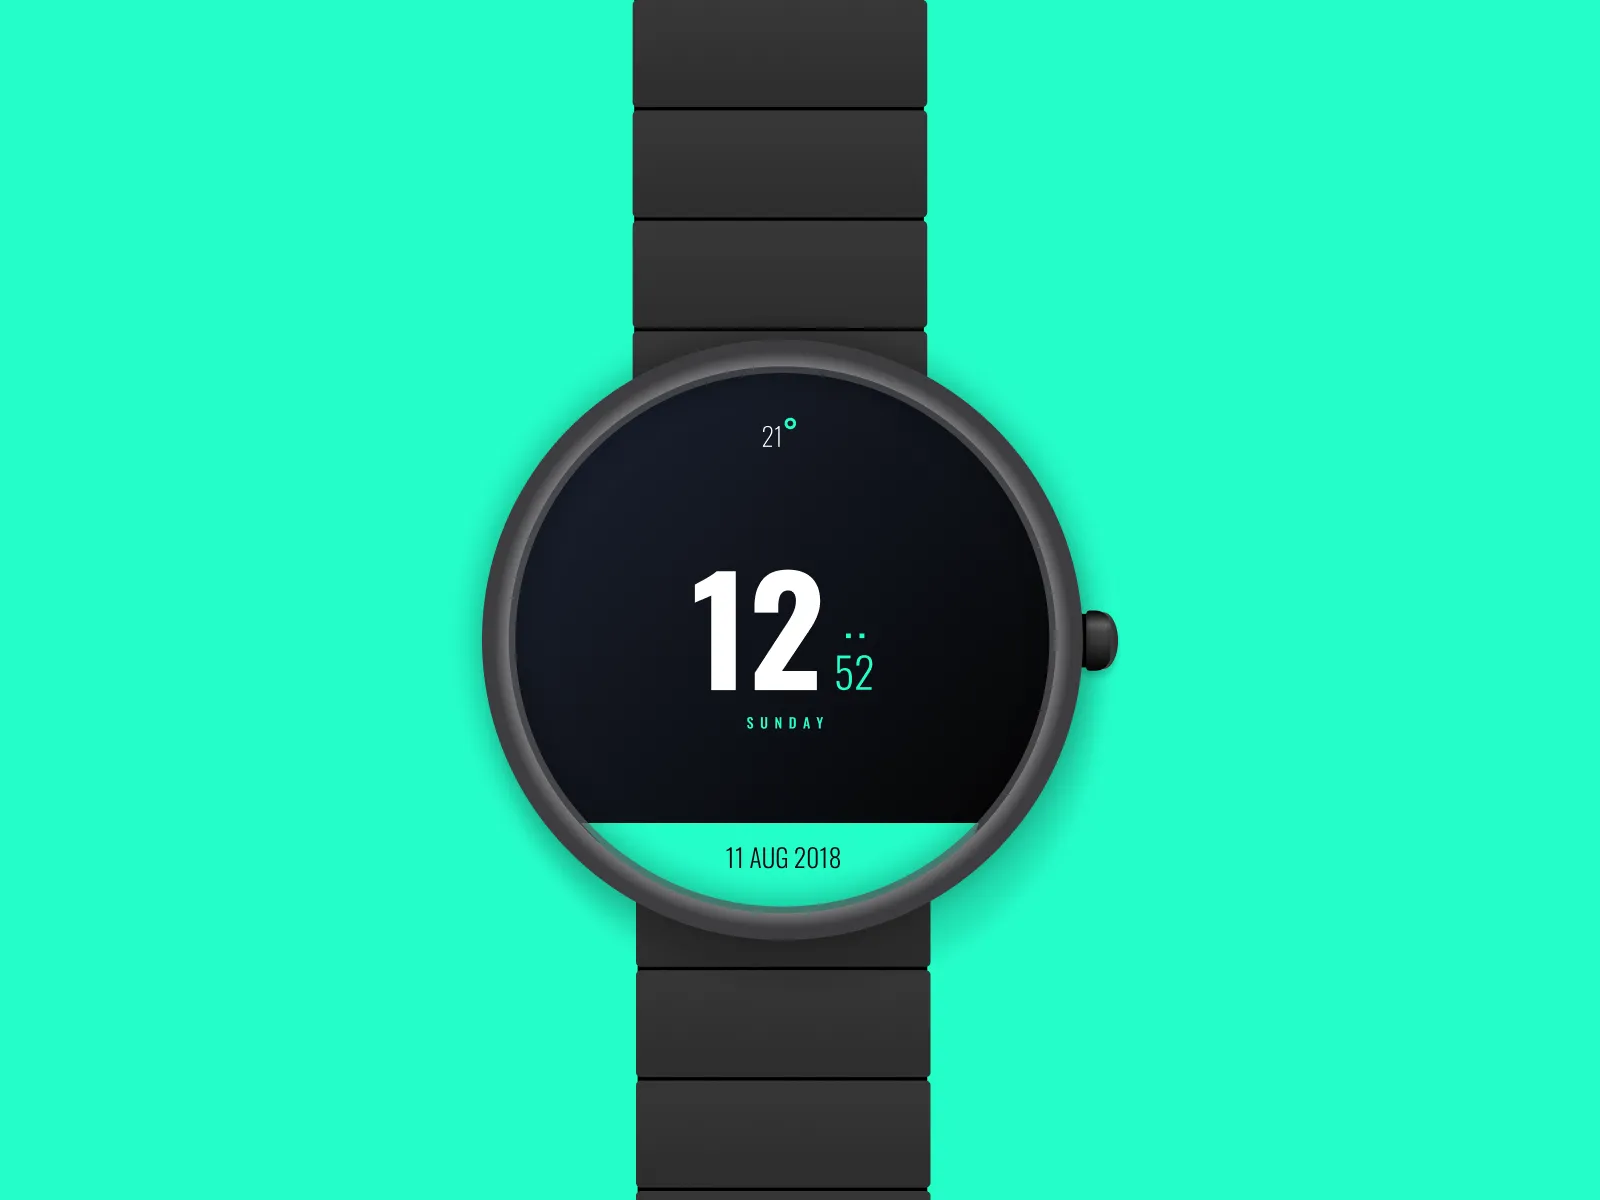 Smartwatch Mockup for Figma and Adobe XD No 4